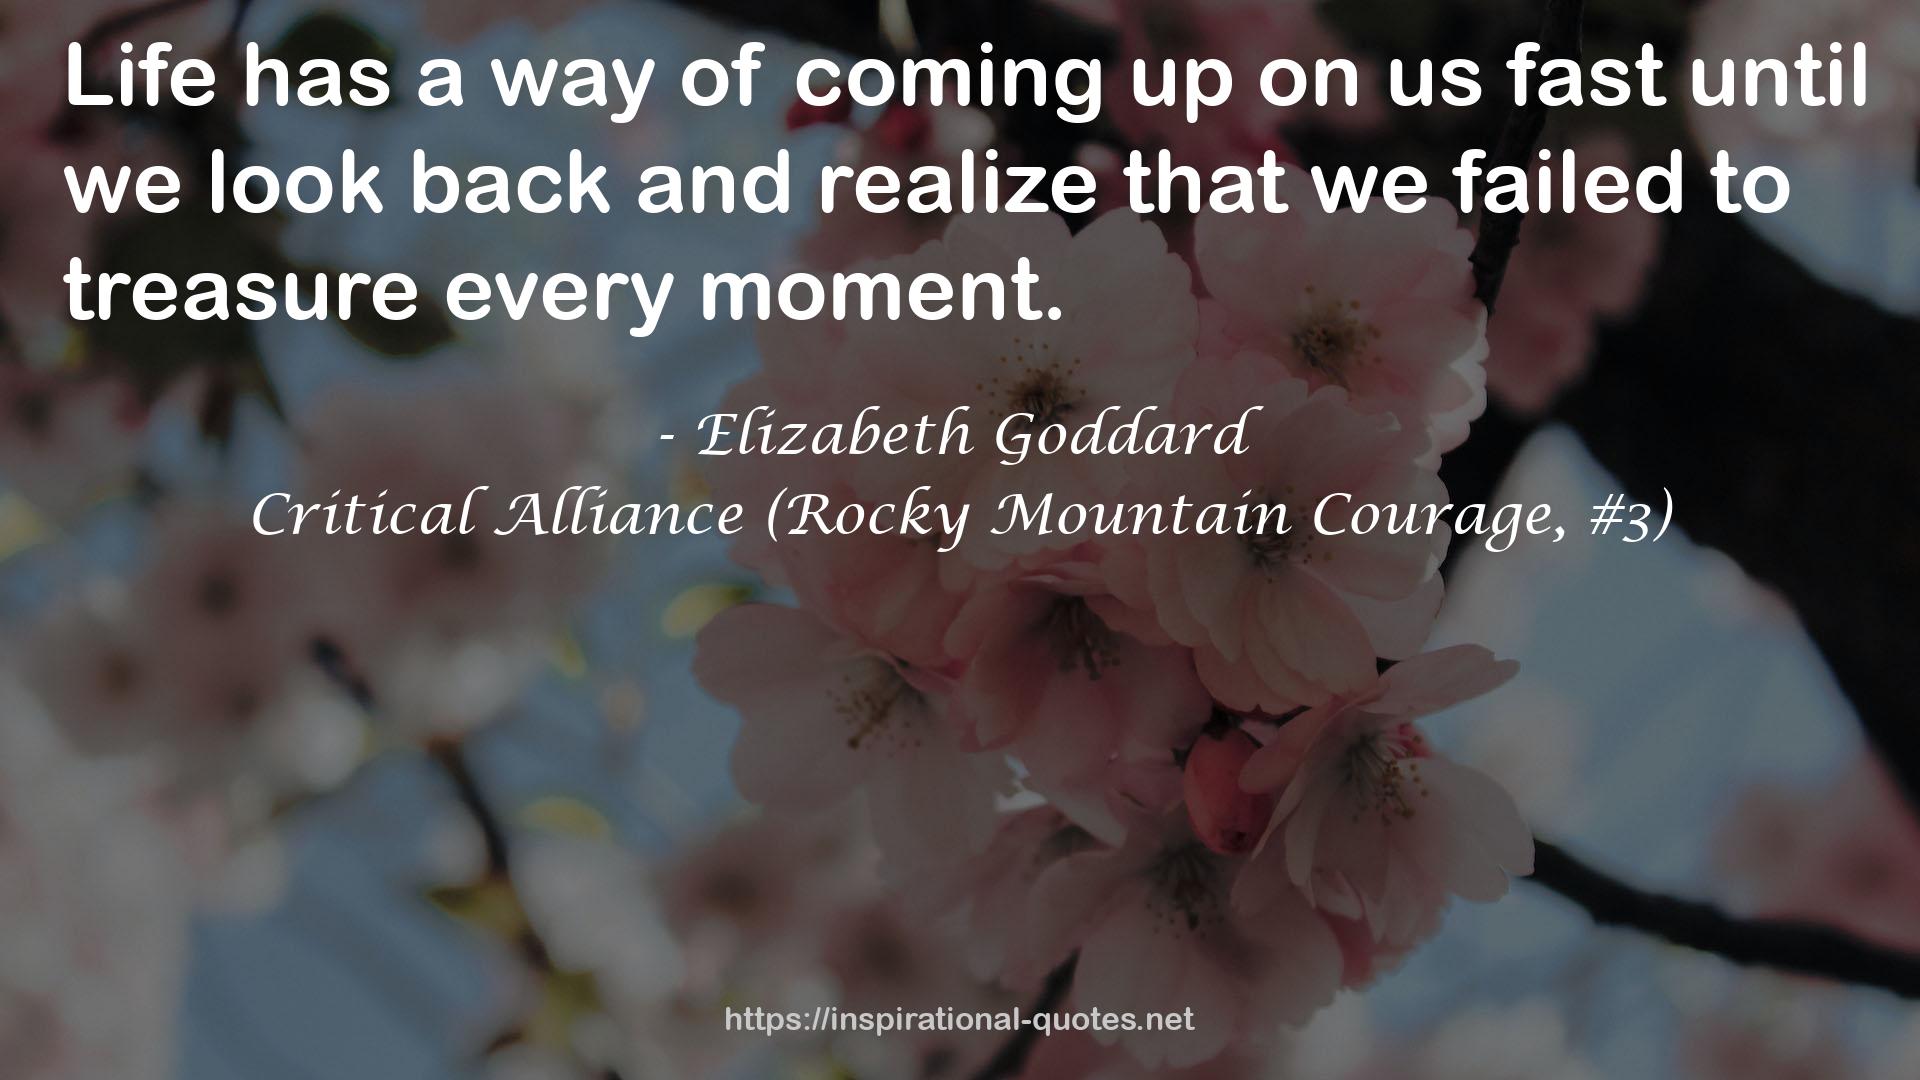 Critical Alliance (Rocky Mountain Courage, #3) QUOTES